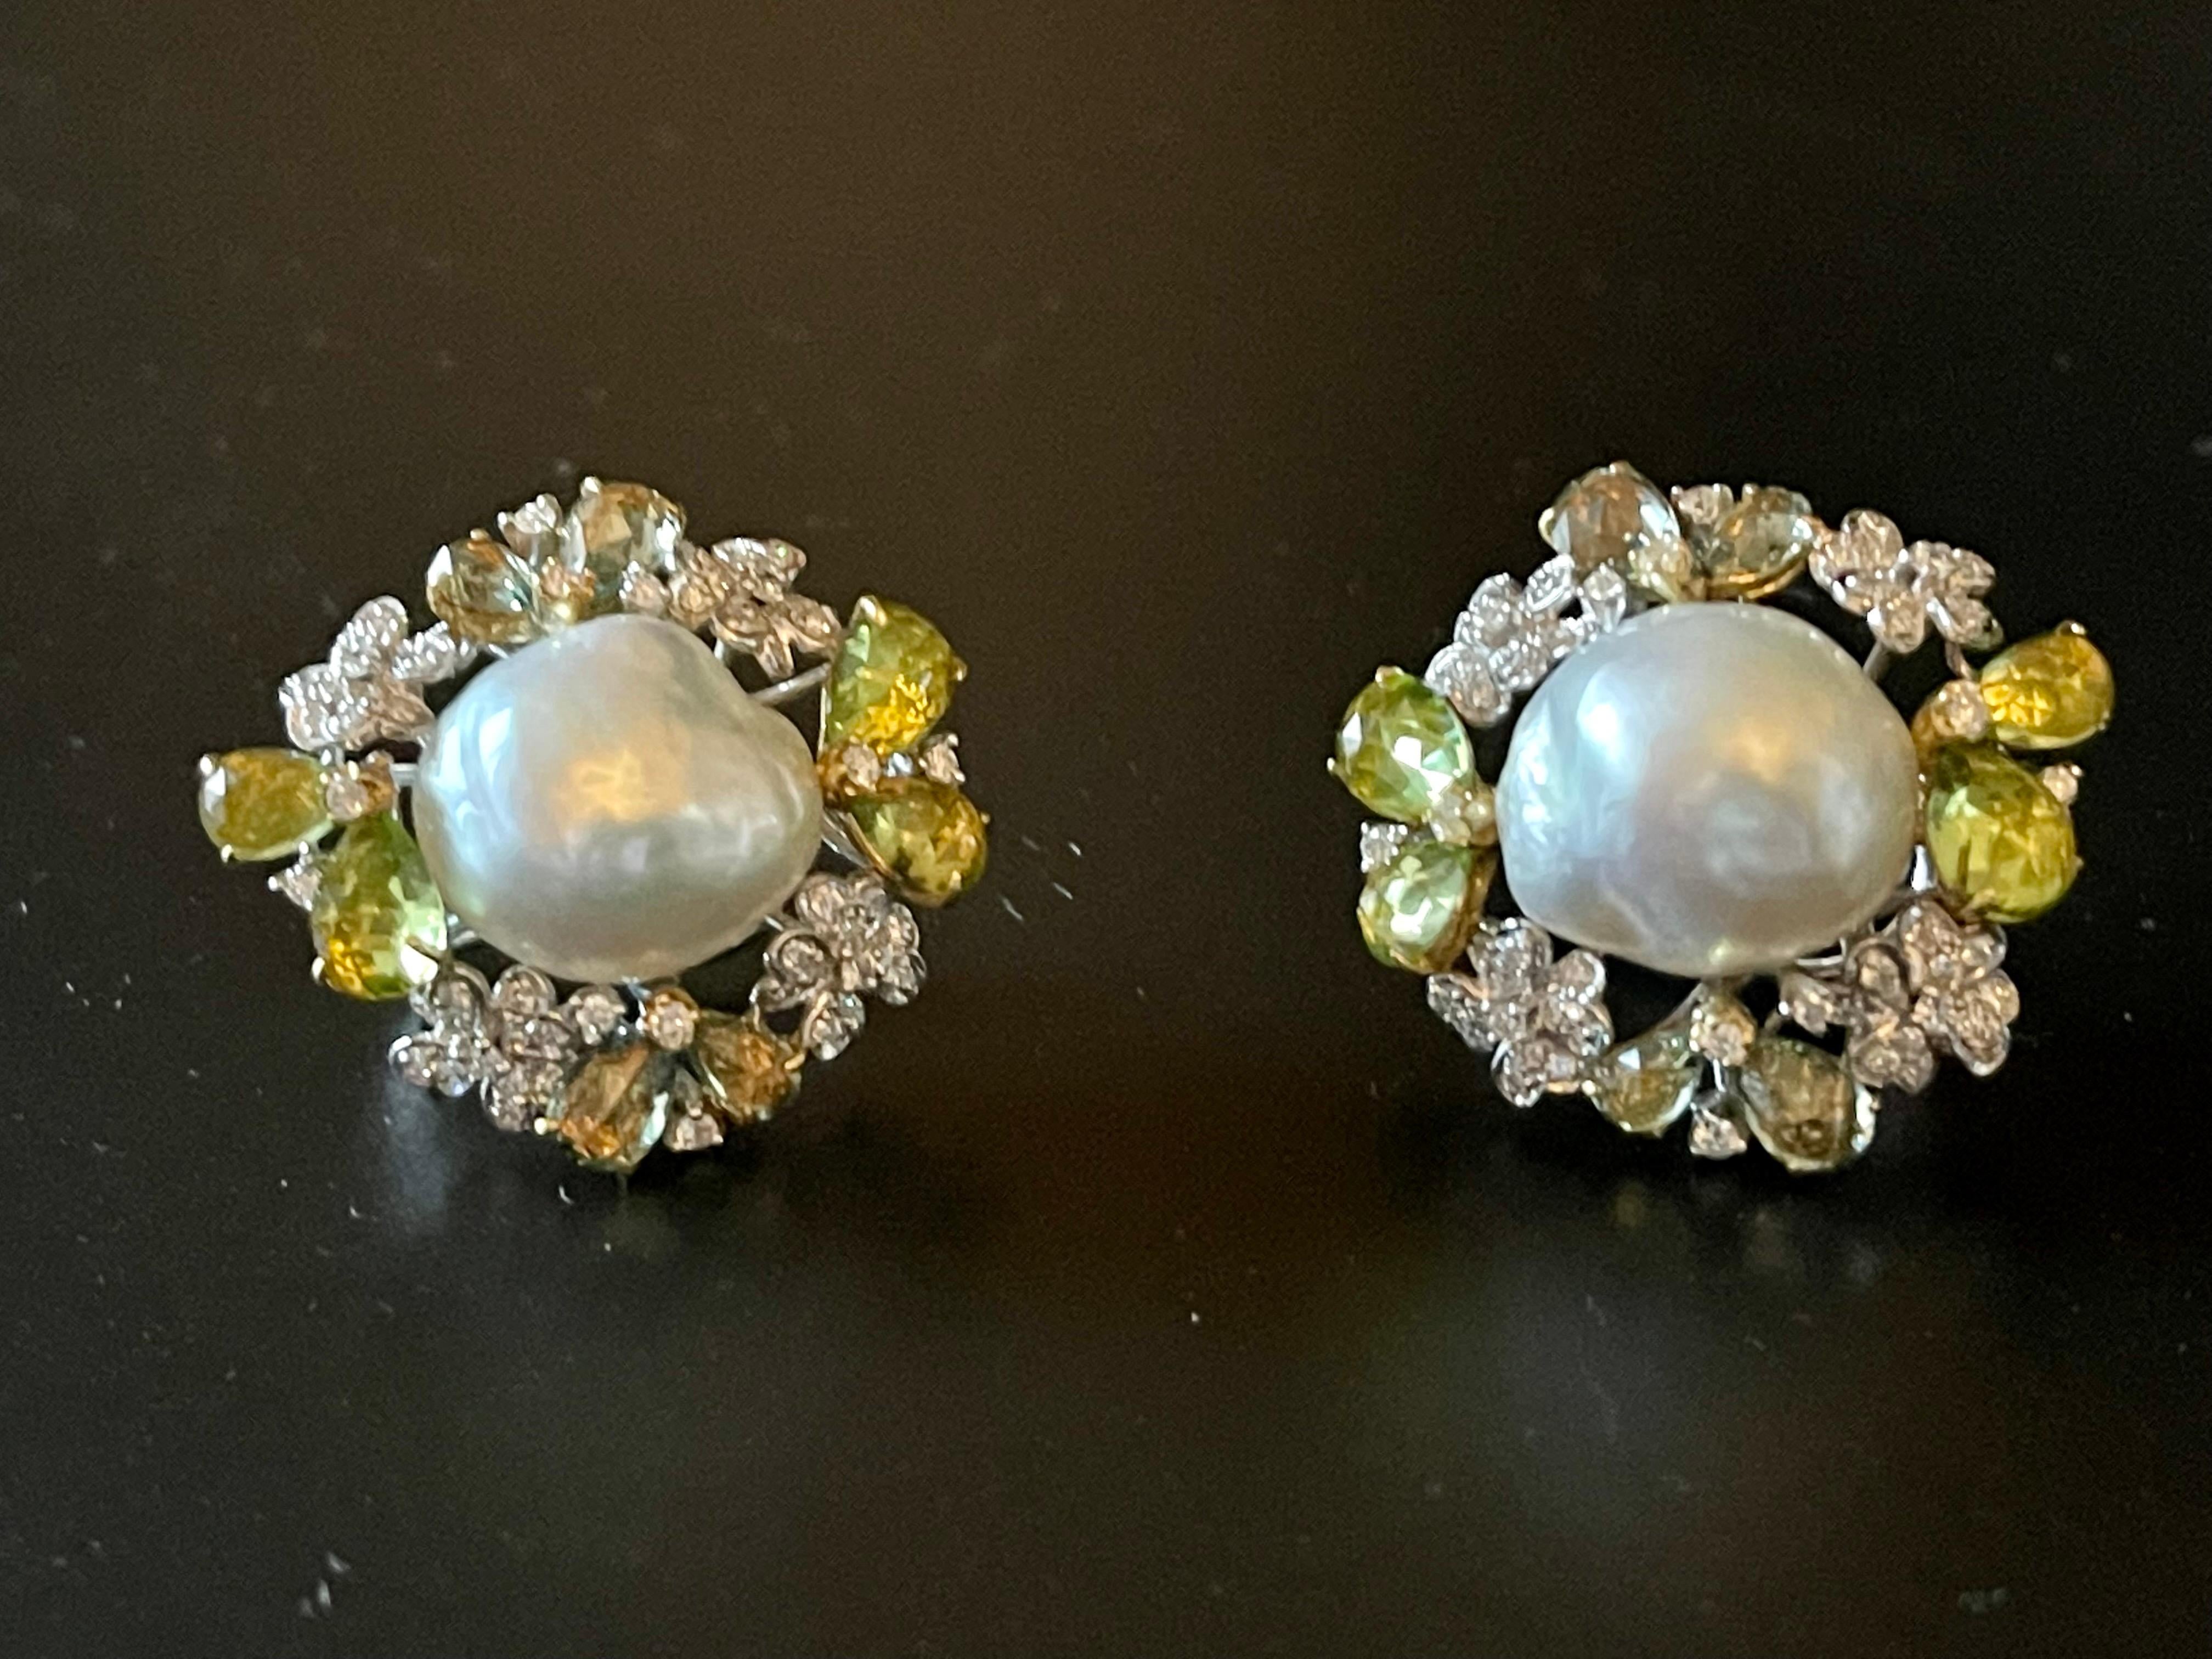 A pair of very lovely 18 K white and yellow Gold earclips featuring 2 white baroque South Sea Pearls surronded by 124 brilliant cut Diamonds, G color, vs clarity, 8 fancy cut green Sapphires weighing 2.80 ct and 8 fancy cut Peridots weighing 0.59